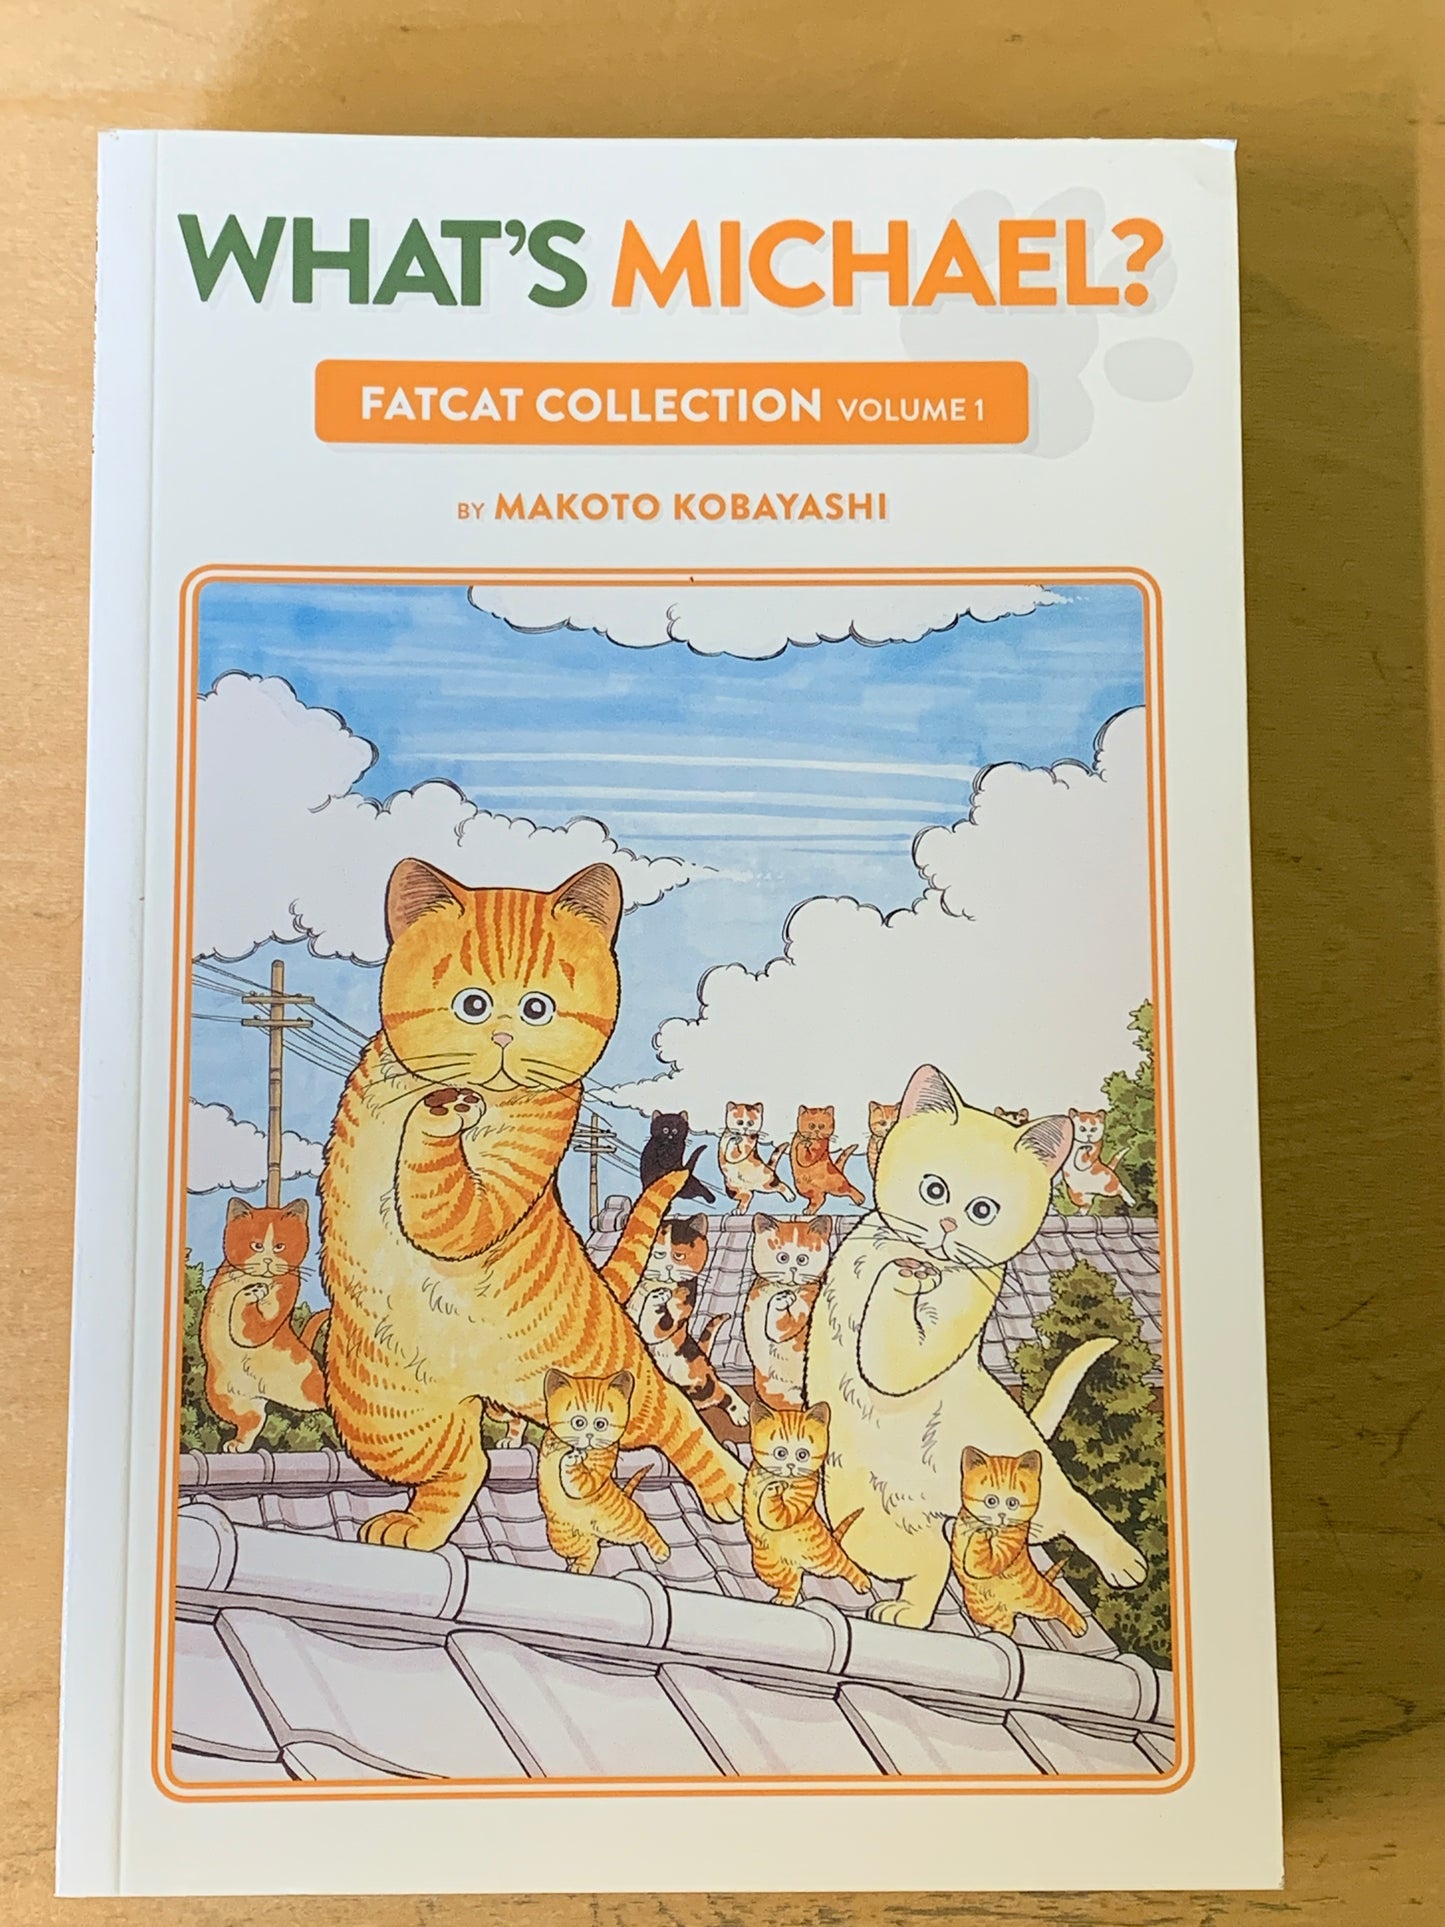 What’s Michael? Fatcat Collection Vol. 1